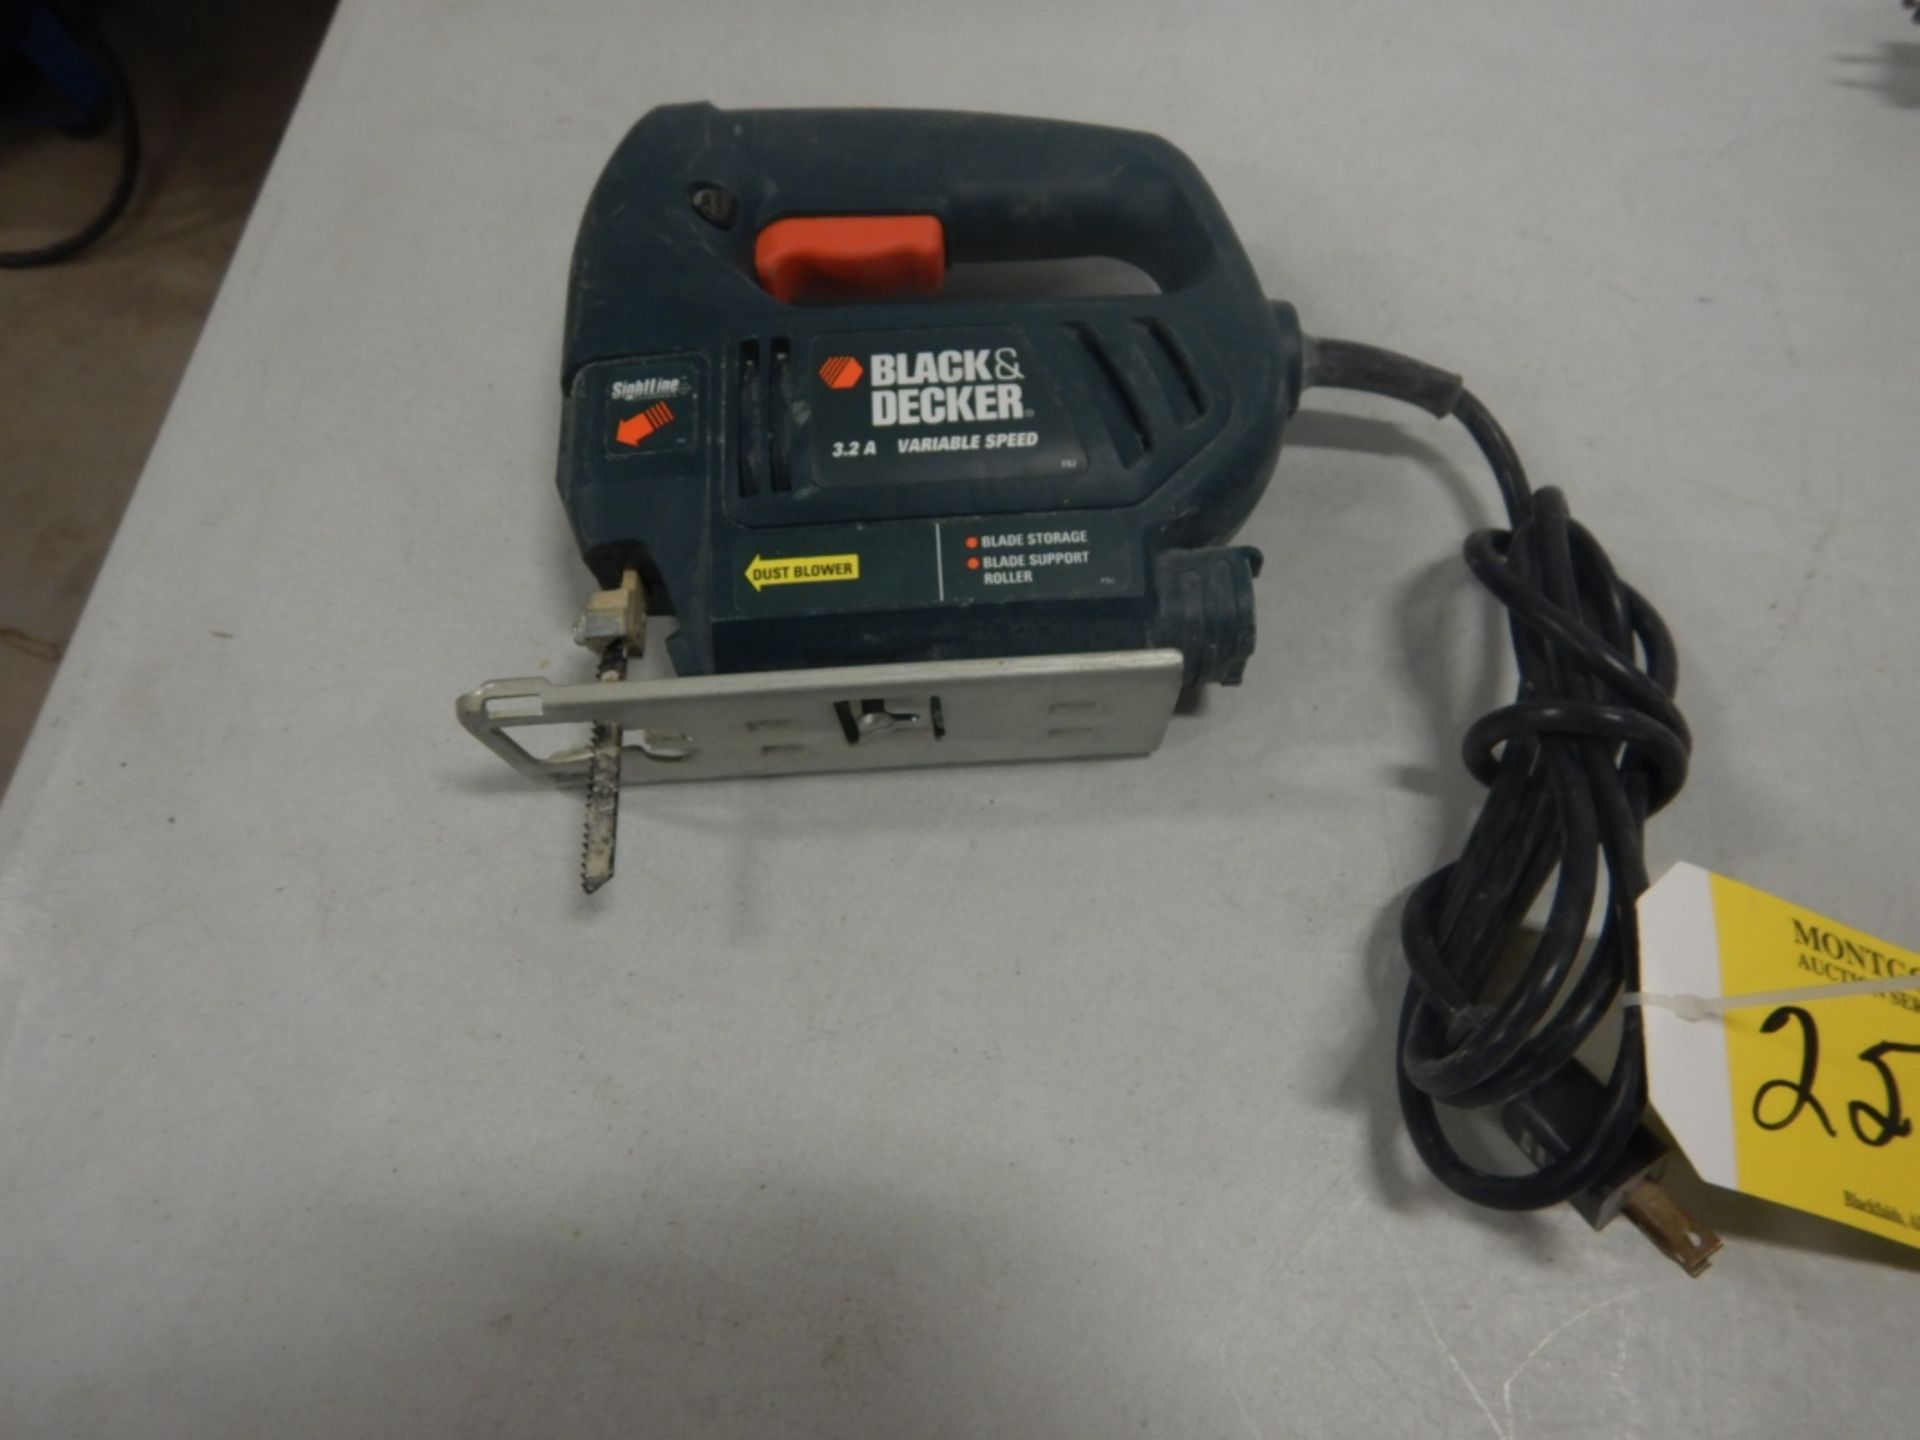 L/O BLACK AND DECKER VARIABLE SPEED 3.2A JIG SAW, SEARS CRAFTSMAN 1/4 SHEET PALM SANDER, MAXIMUM 7. - Image 6 of 10